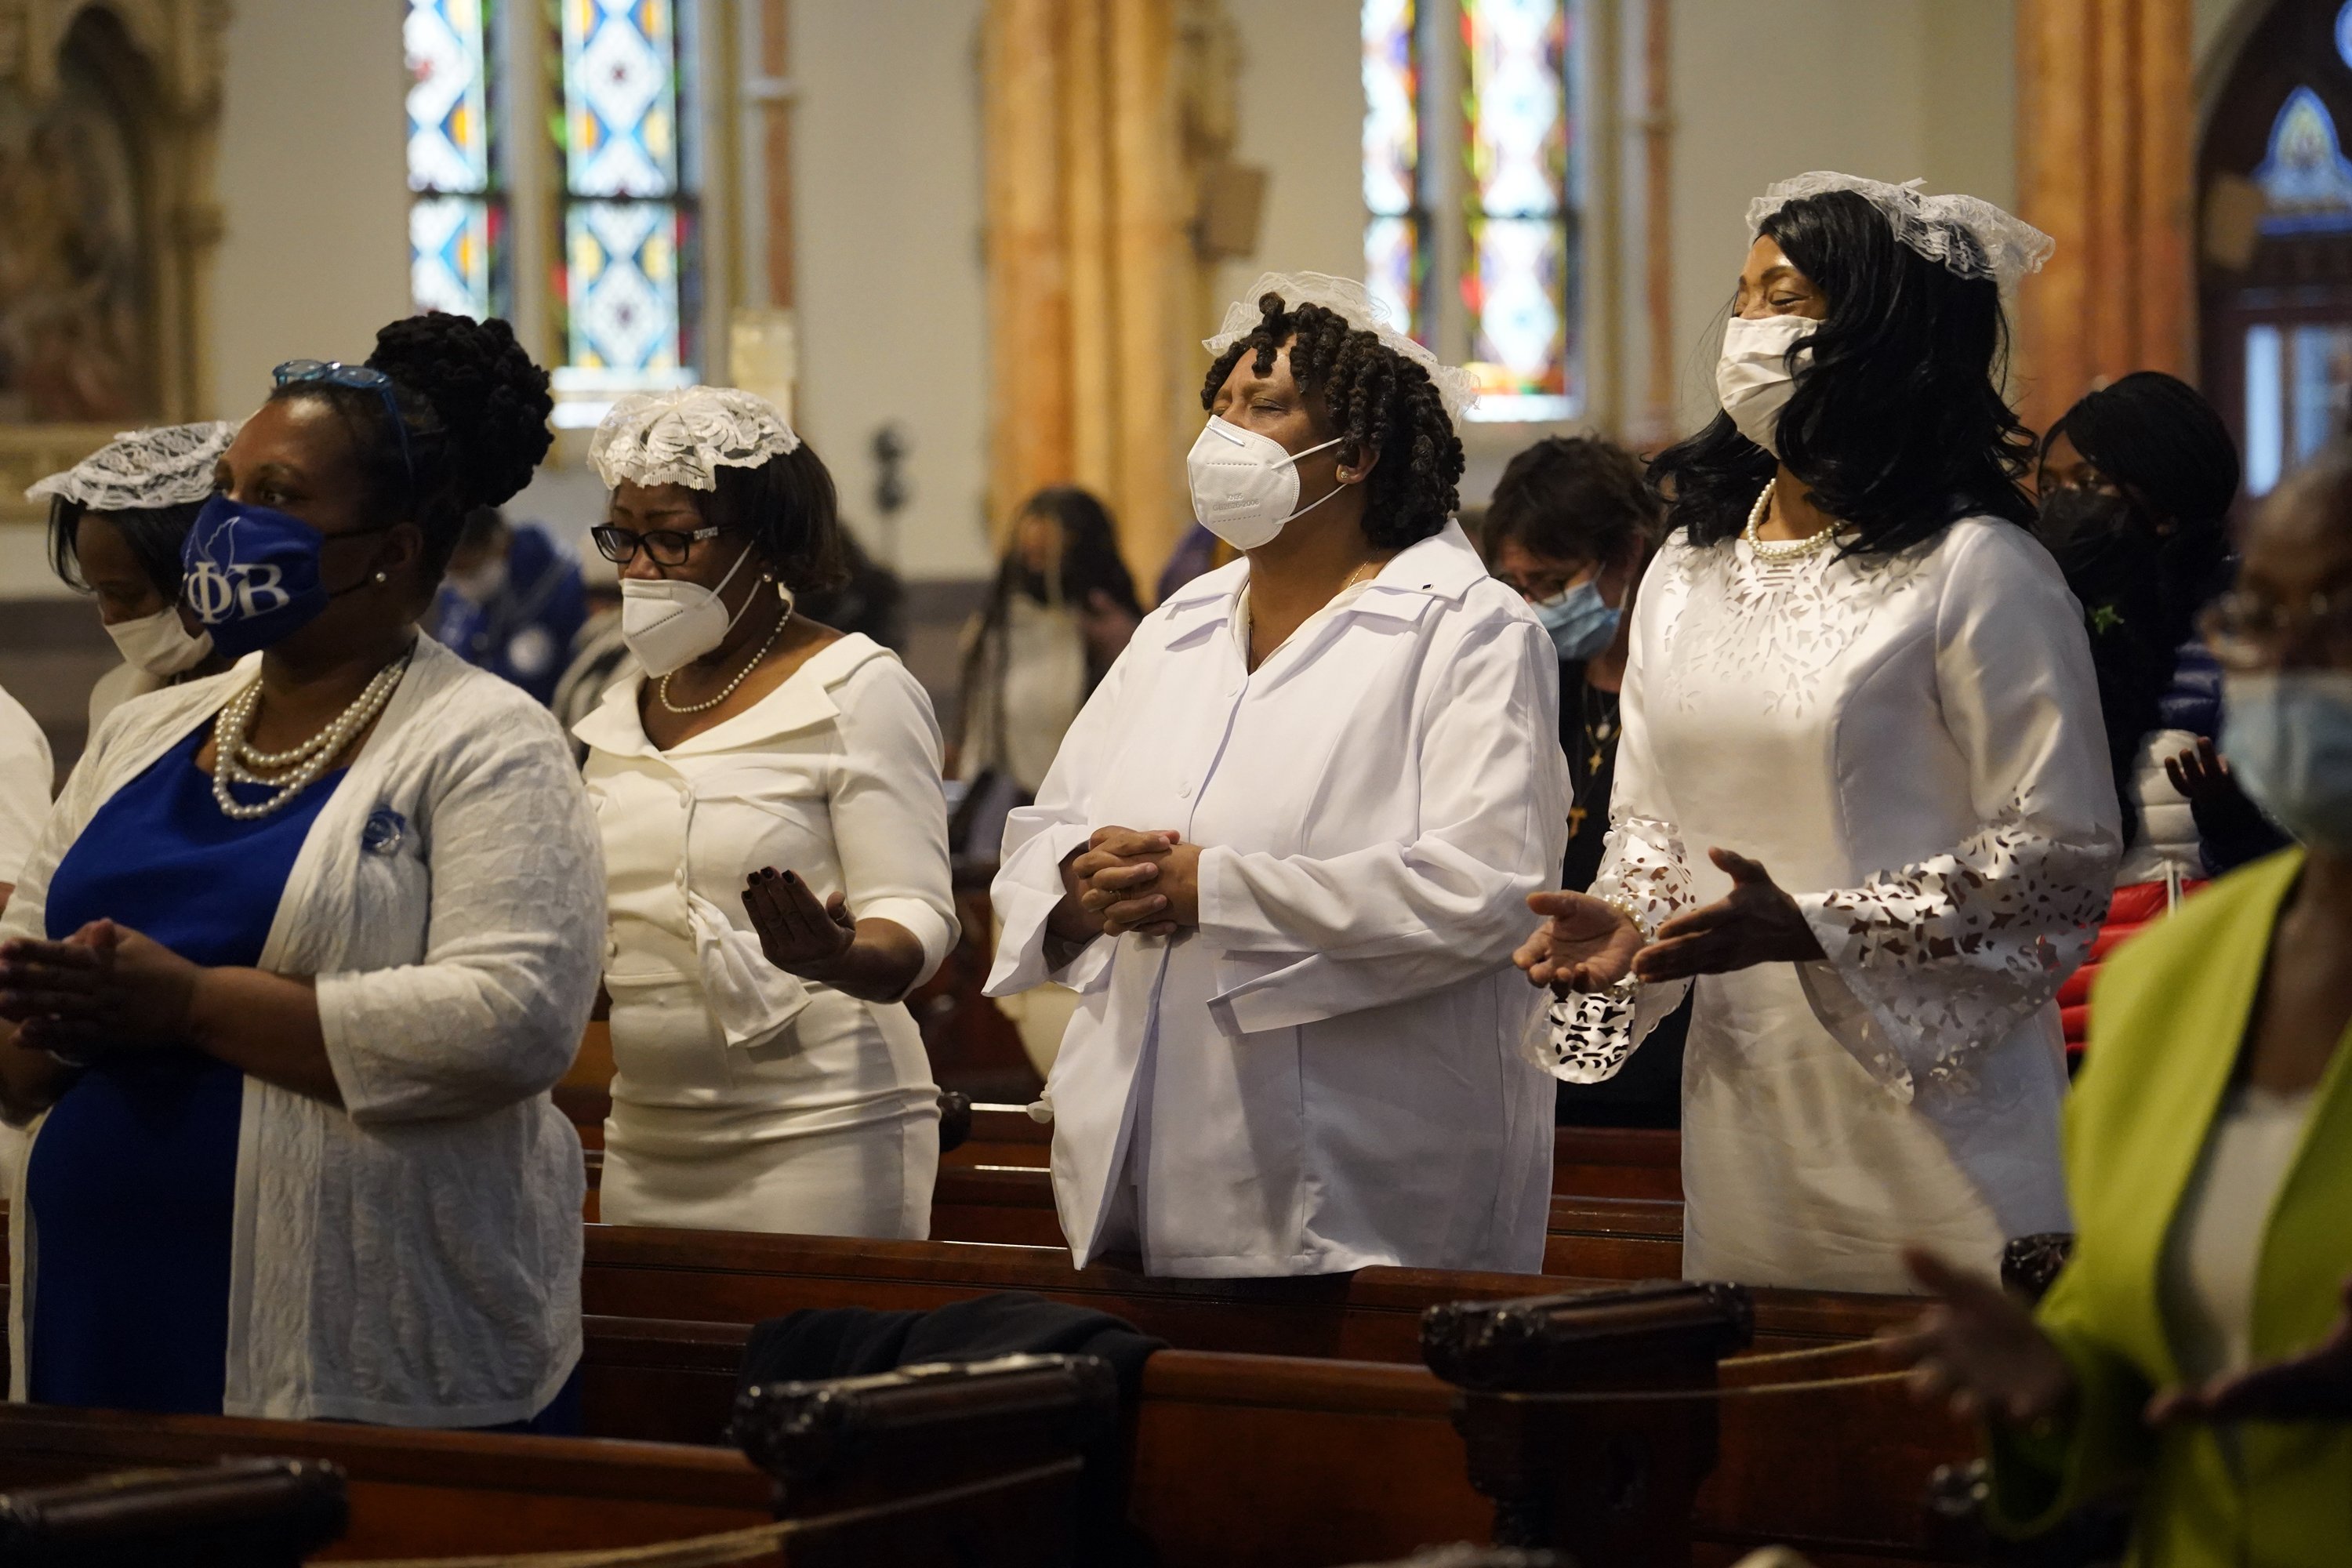 Members of the Ladies Auxiliary of the Knights of Peter Claver pray during a Mass marking Black Catholic History Month Nov. 21, 2021, at Our Lady of Victory Church in the Bedford-Stuyvesant section of Brooklyn, N.Y. (CNS photo/Gregory A. Shemitz)